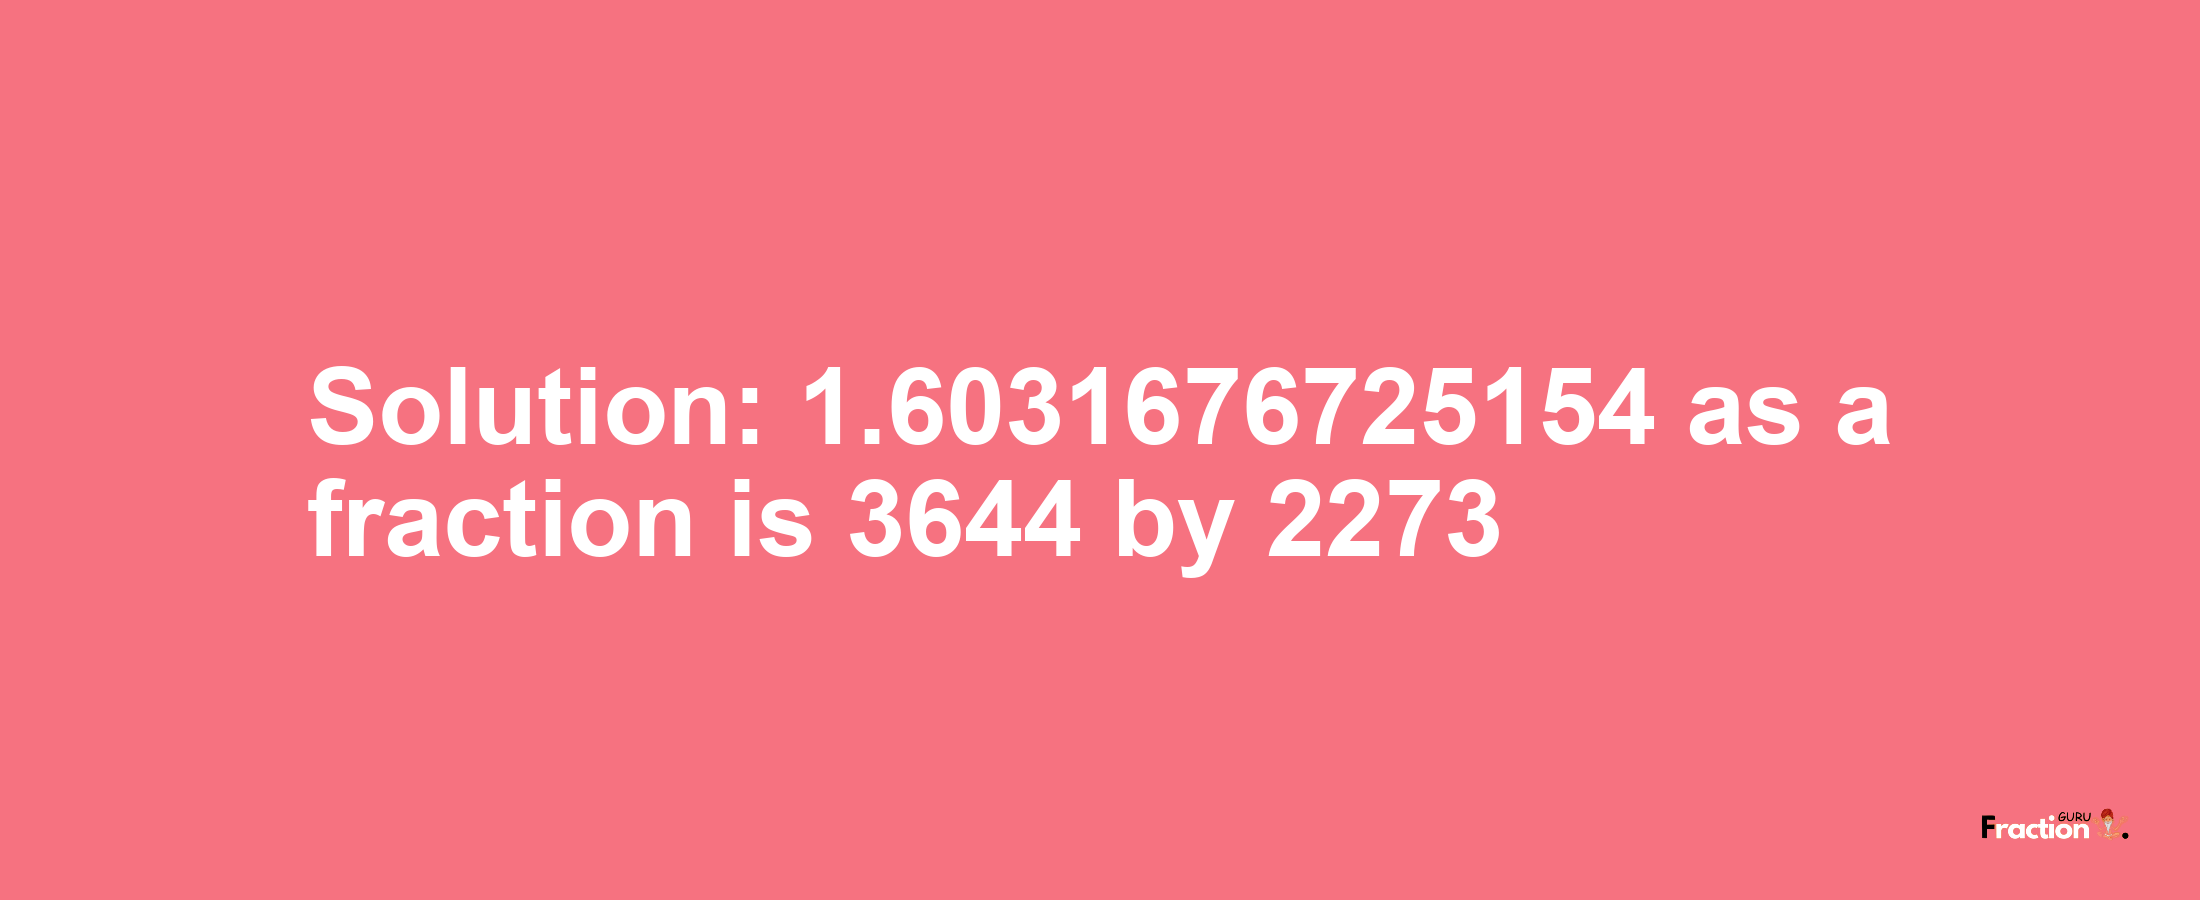 Solution:1.6031676725154 as a fraction is 3644/2273